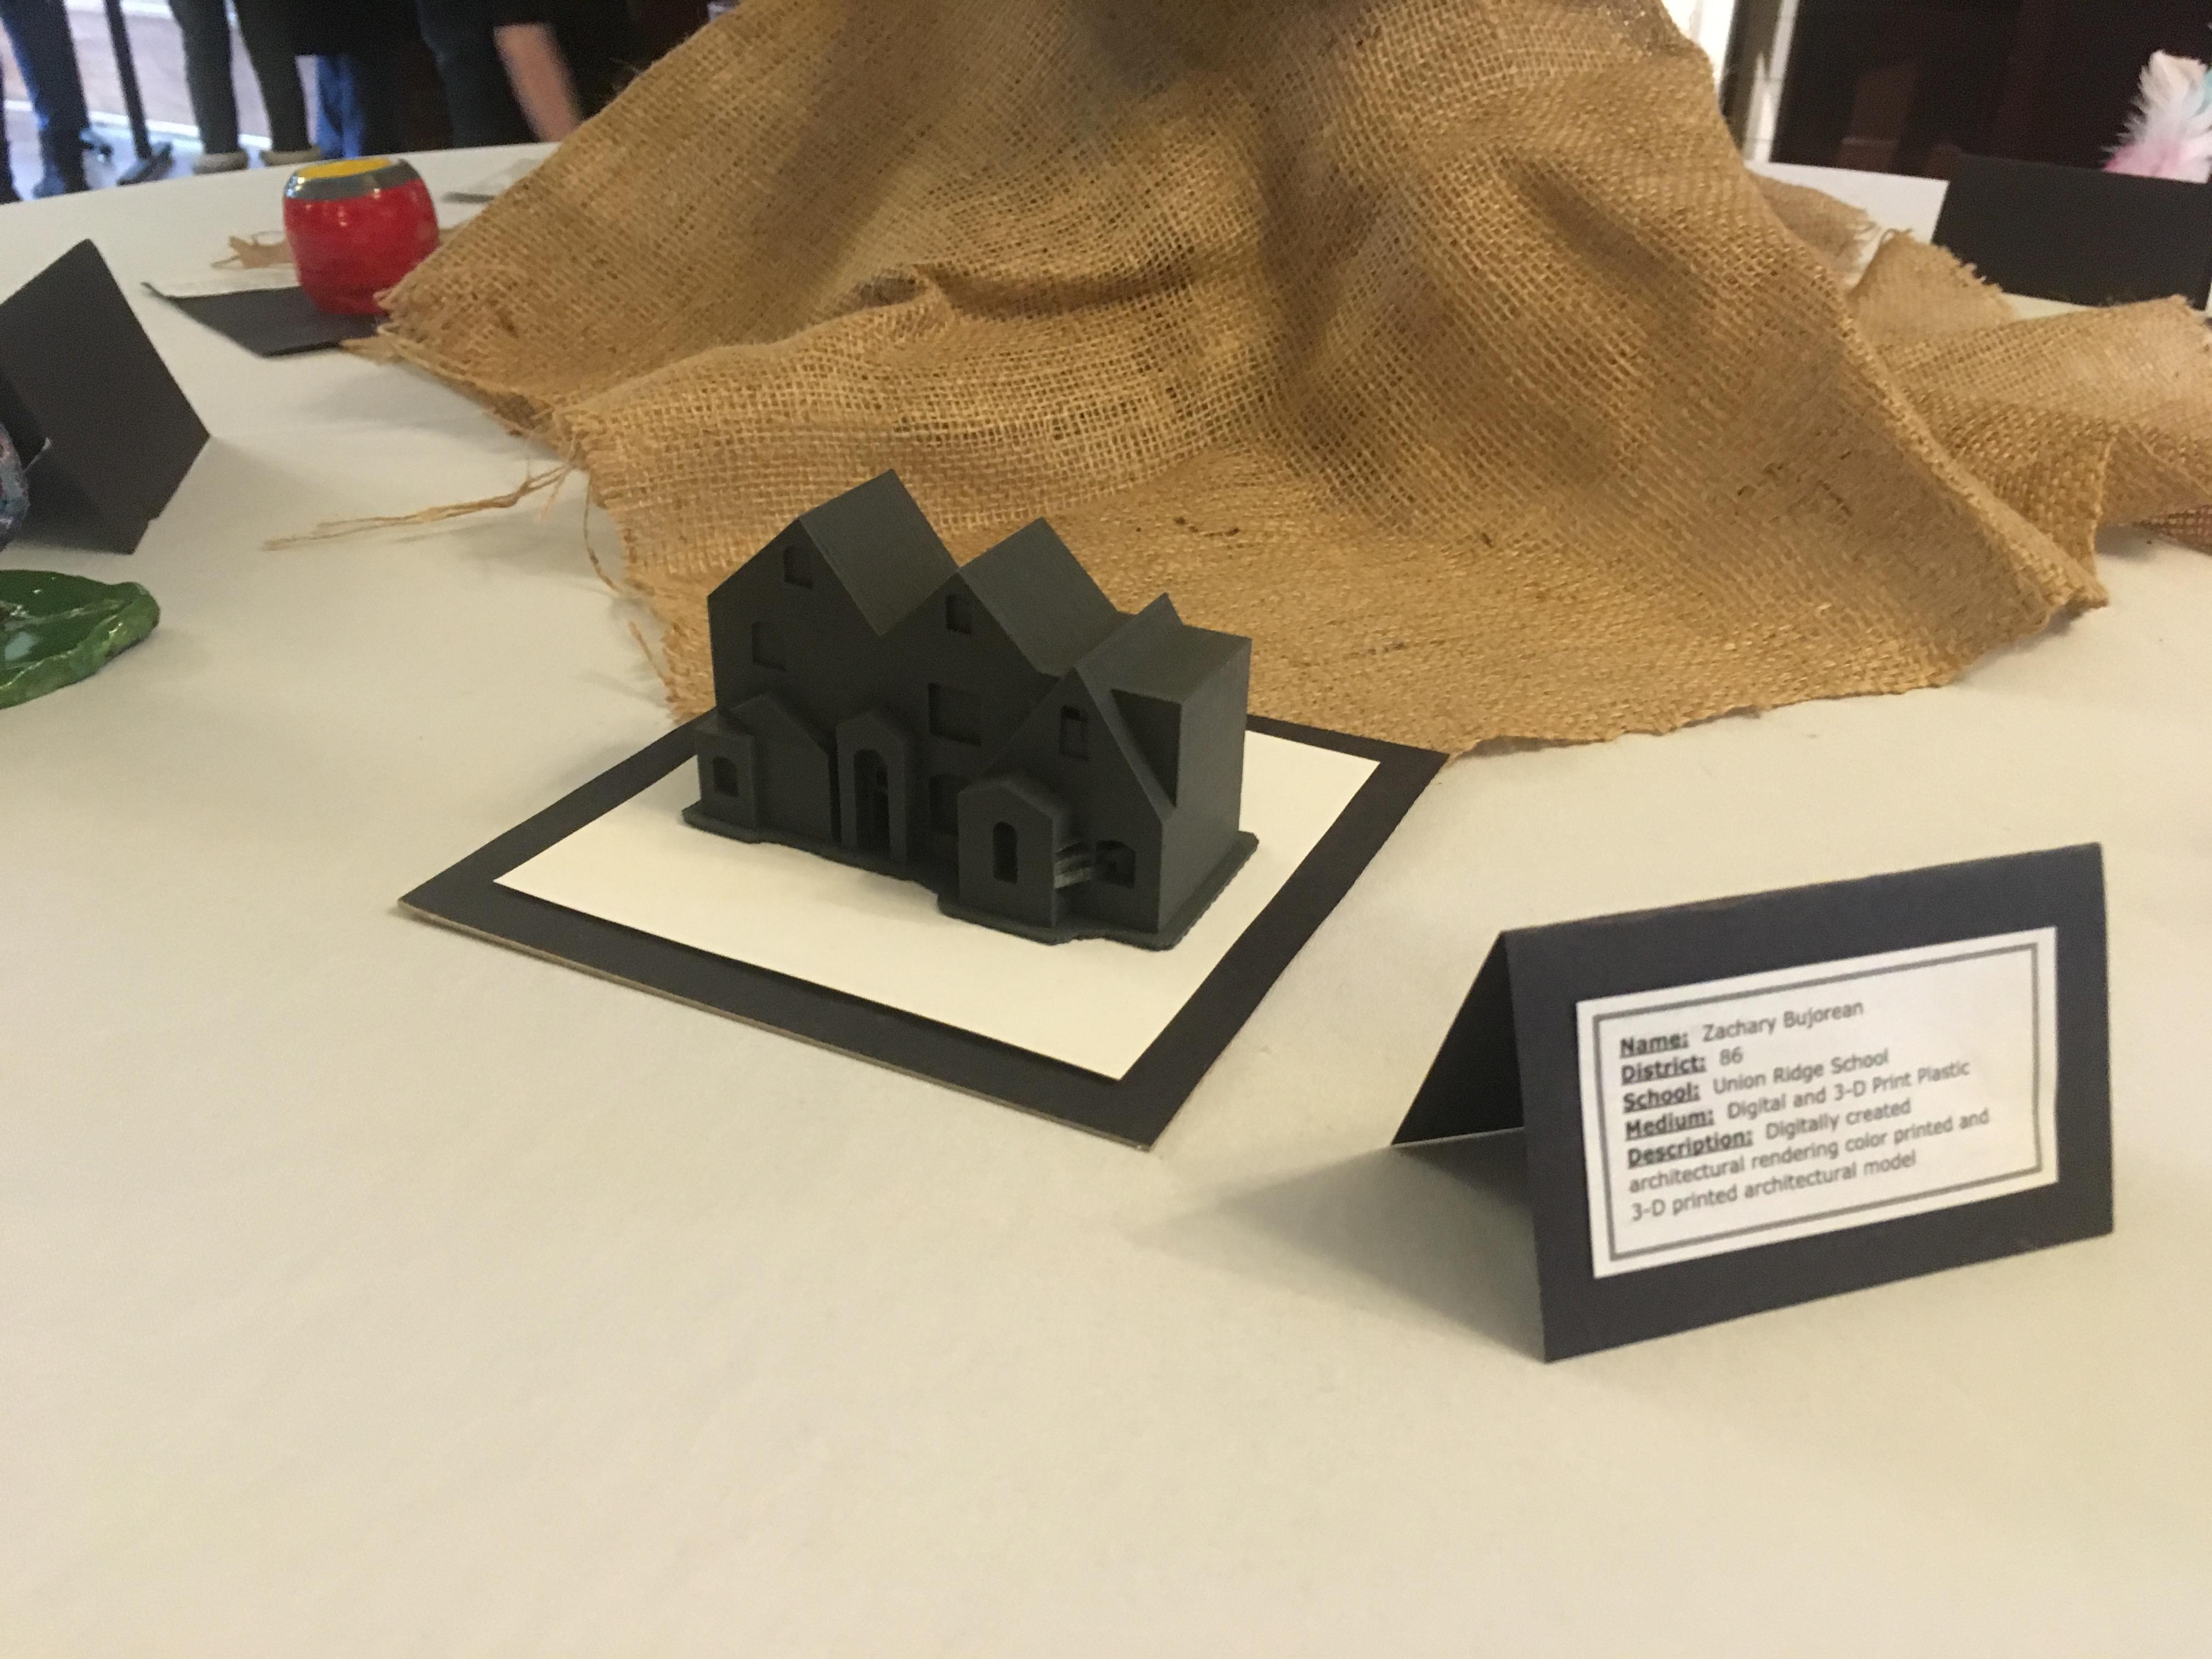 artwork exposition, 3d printed house